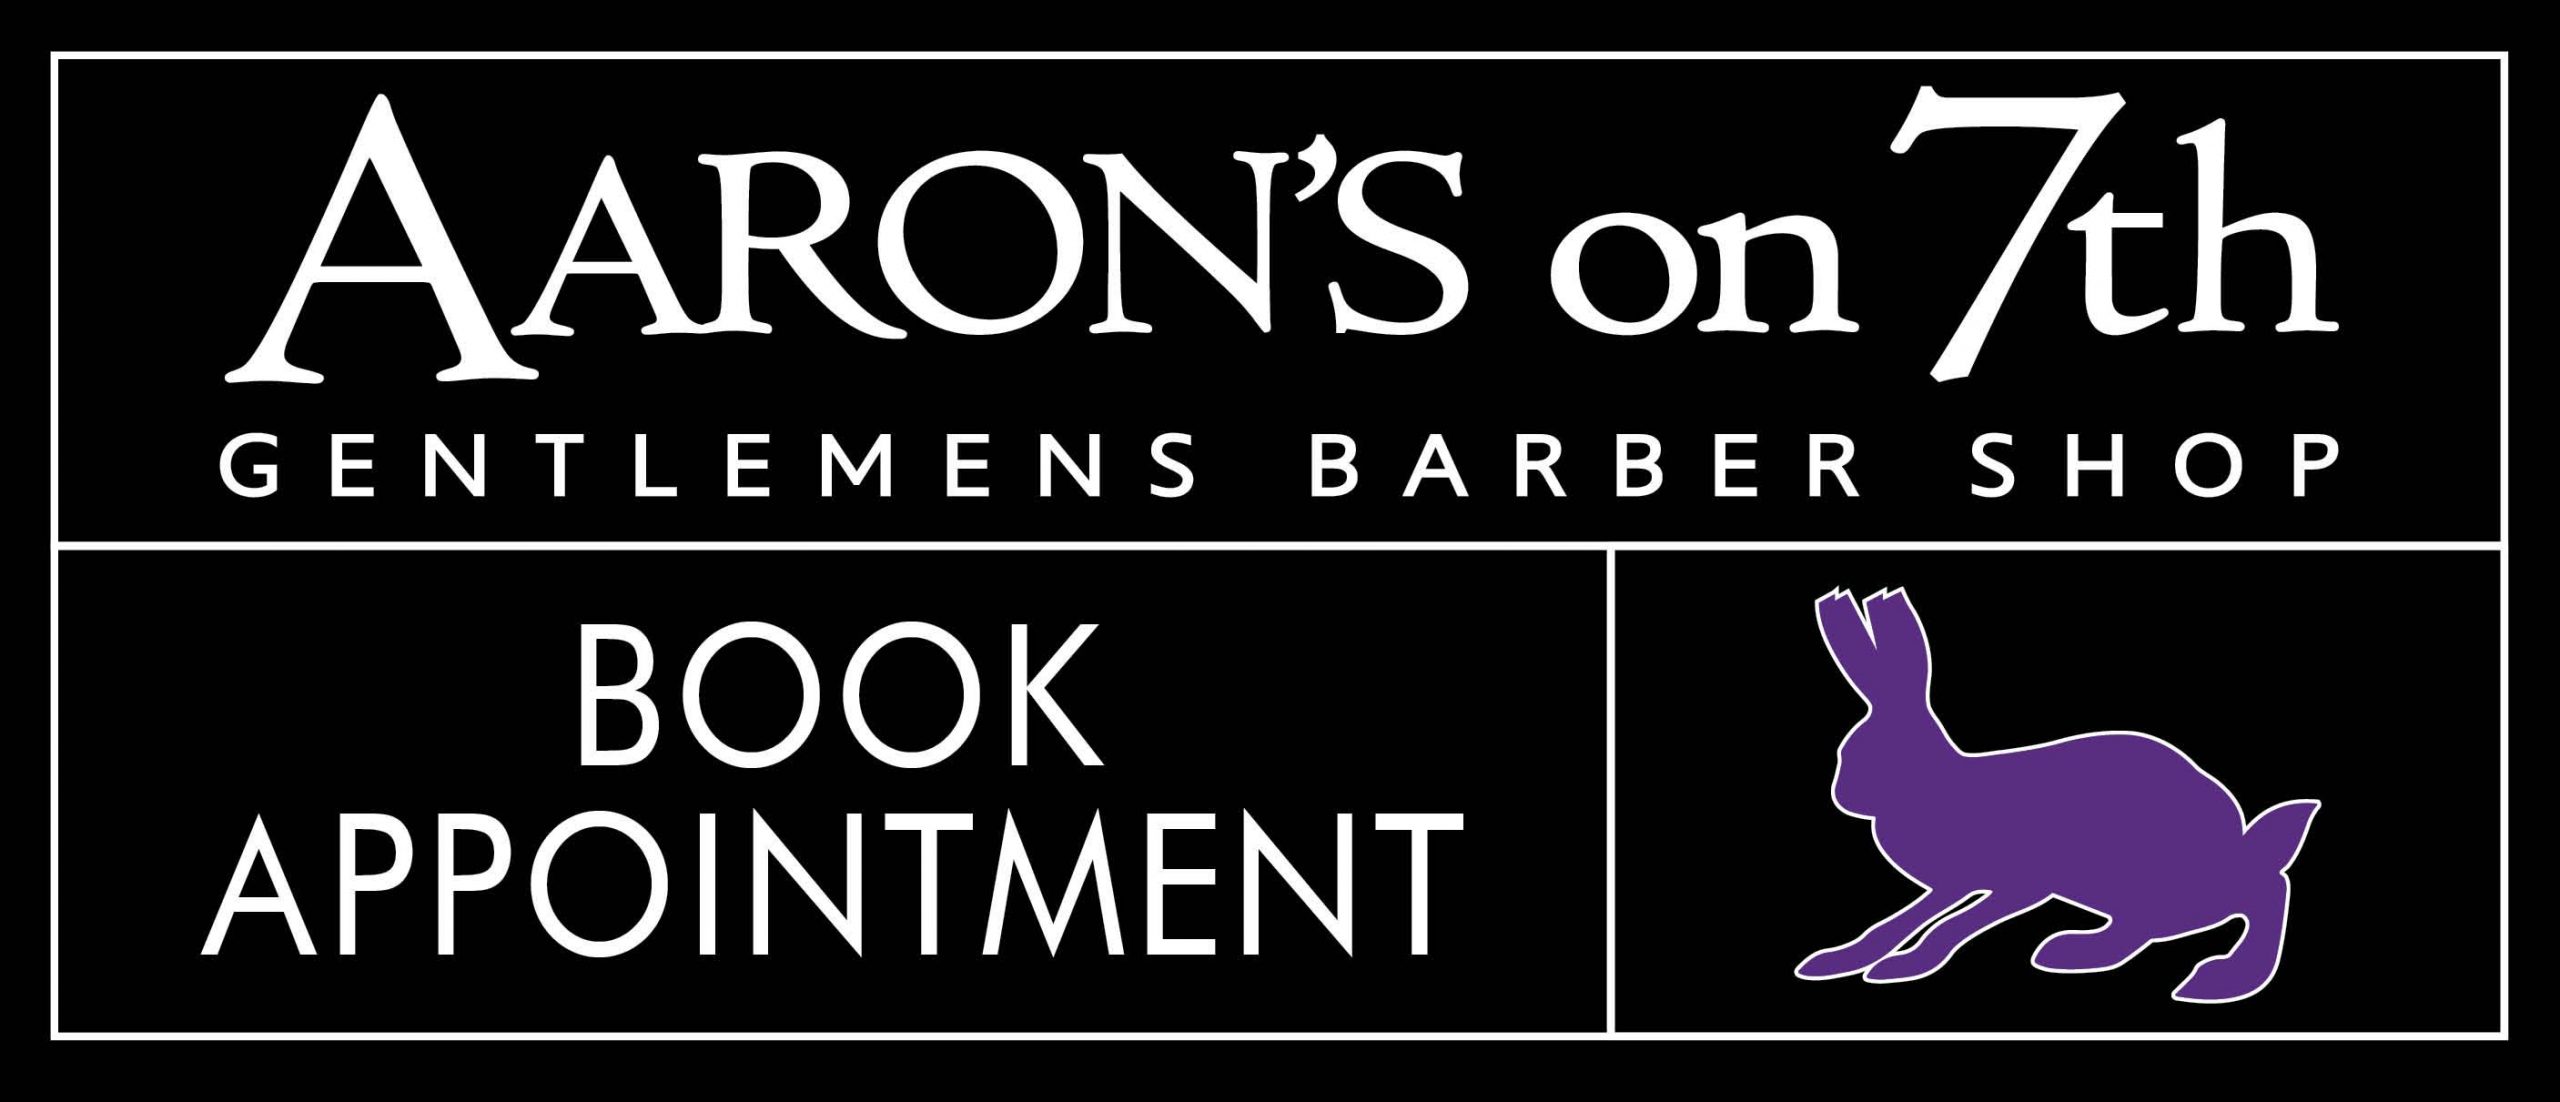 Aaron on 7th: Gentlemens Barber Shop » Book an appointment